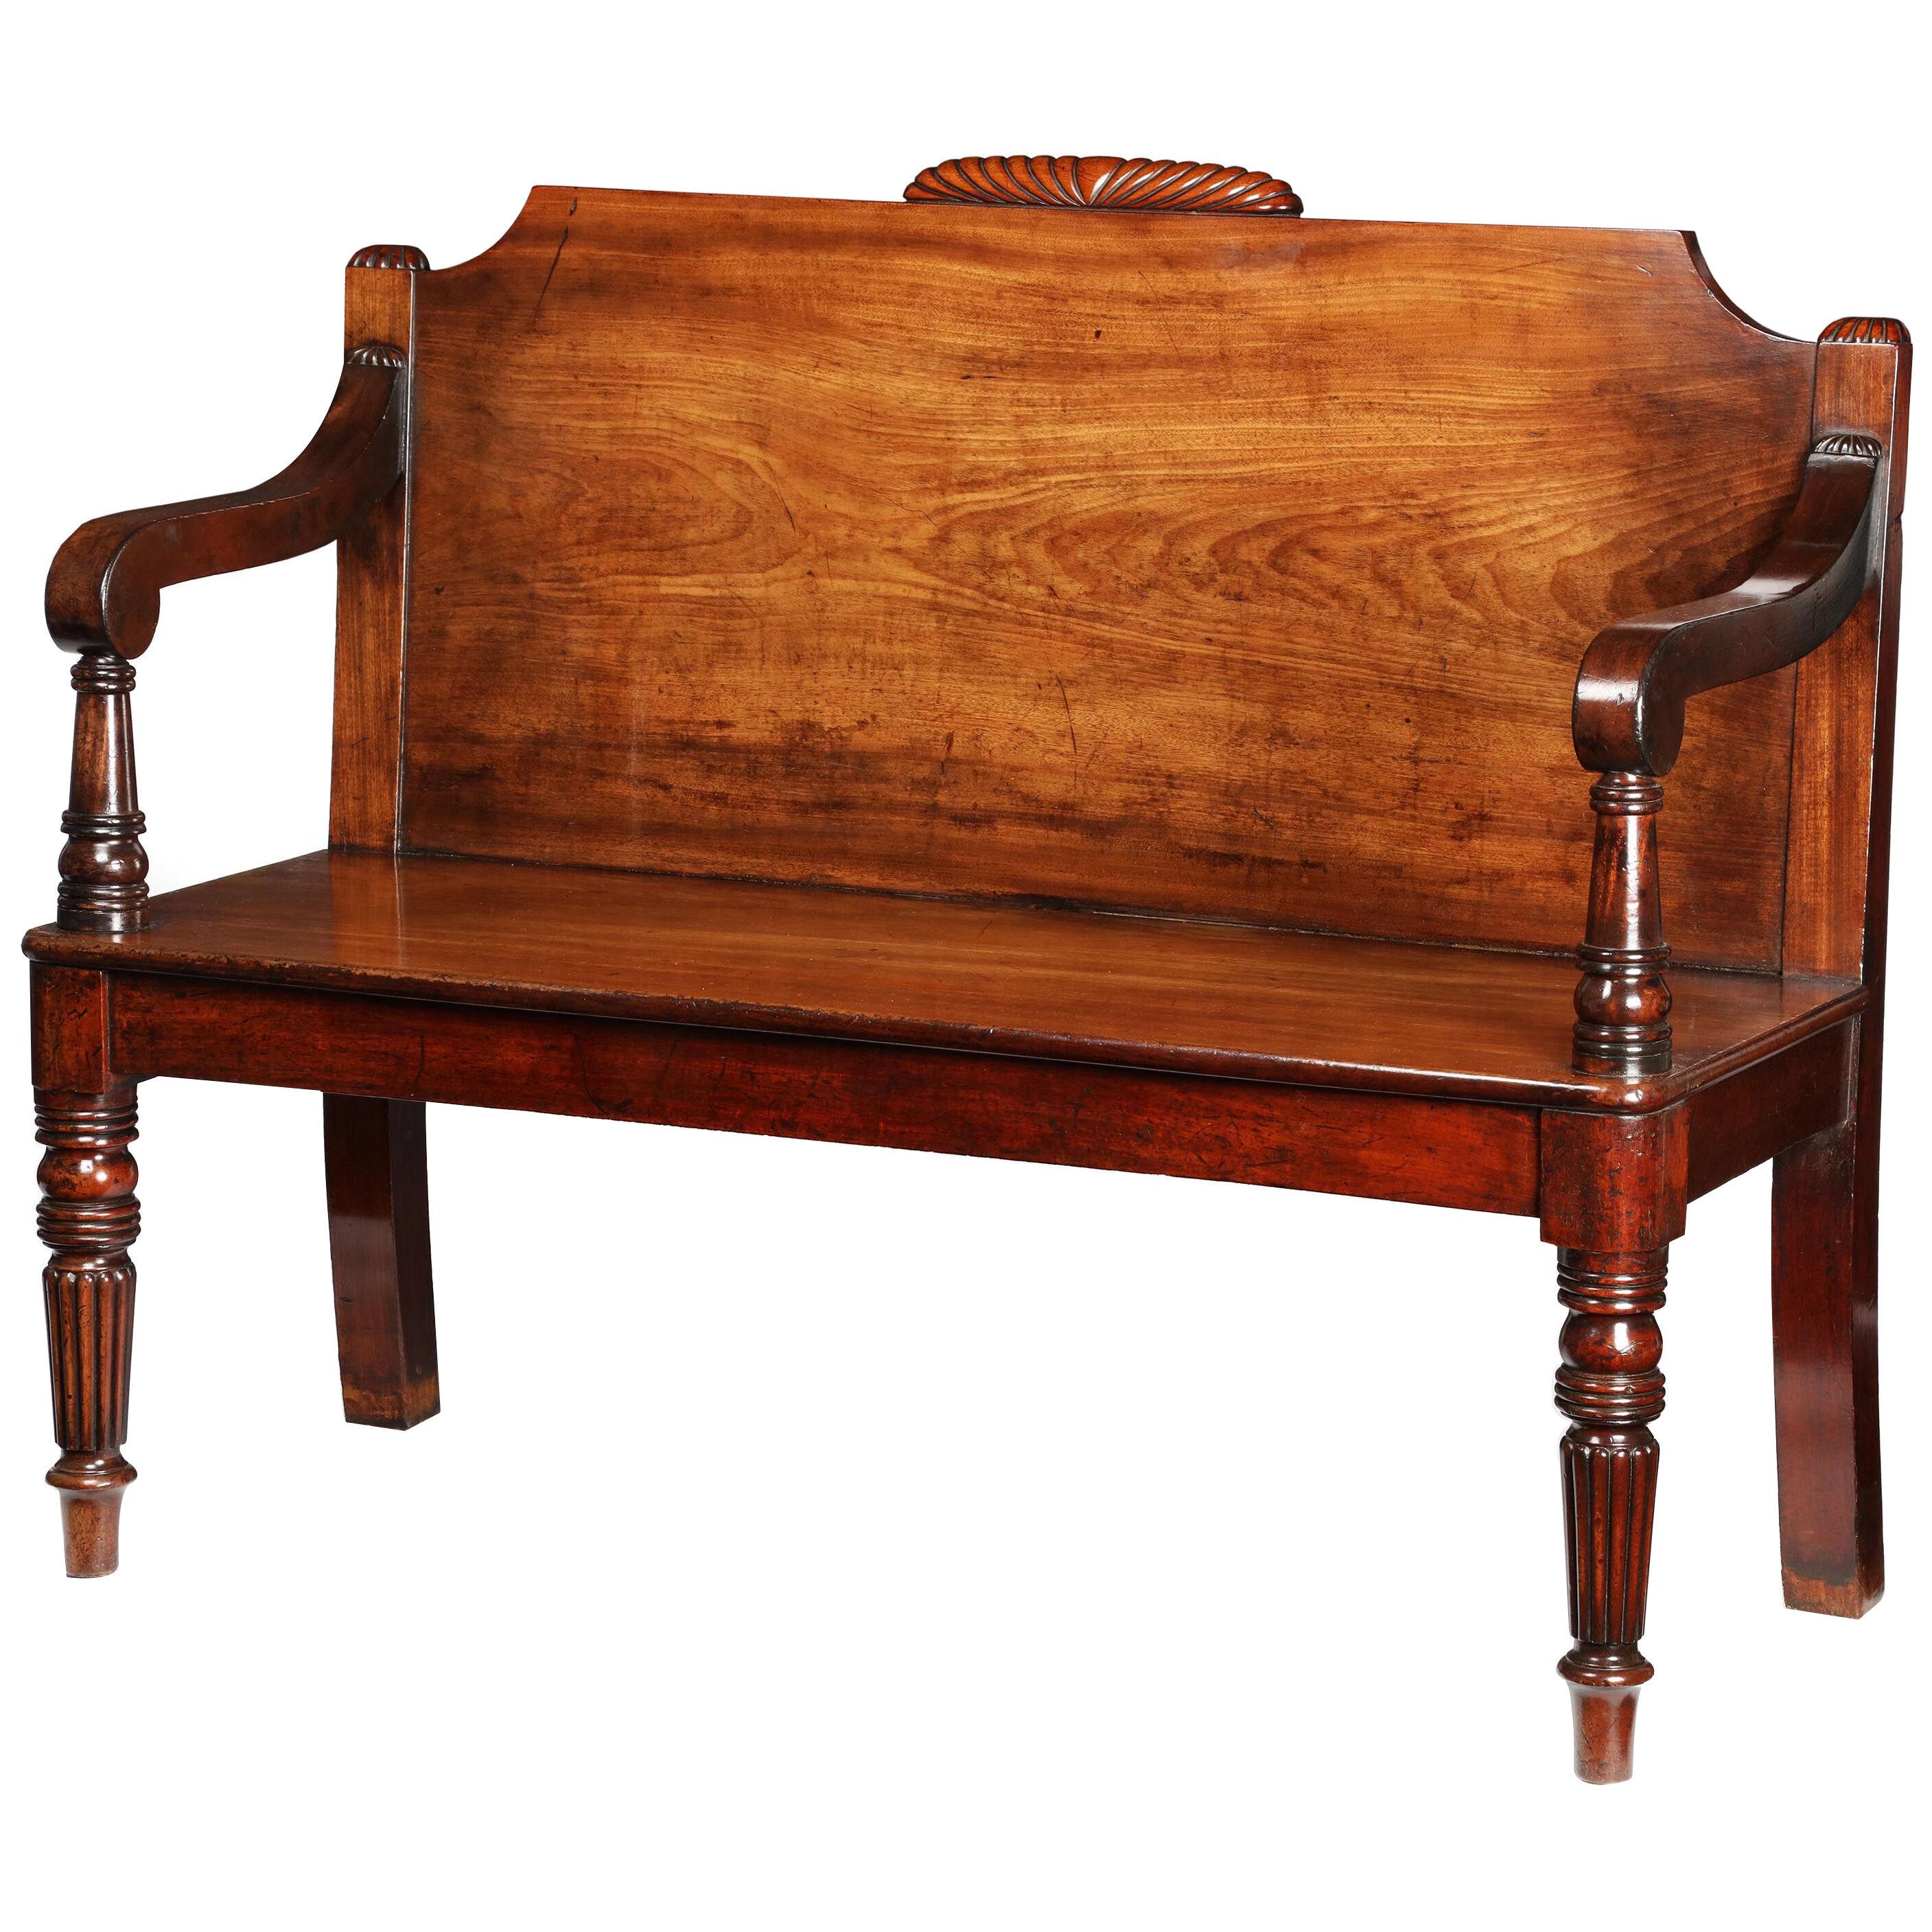 Regency mahogany hall settee in the manner of Gillows